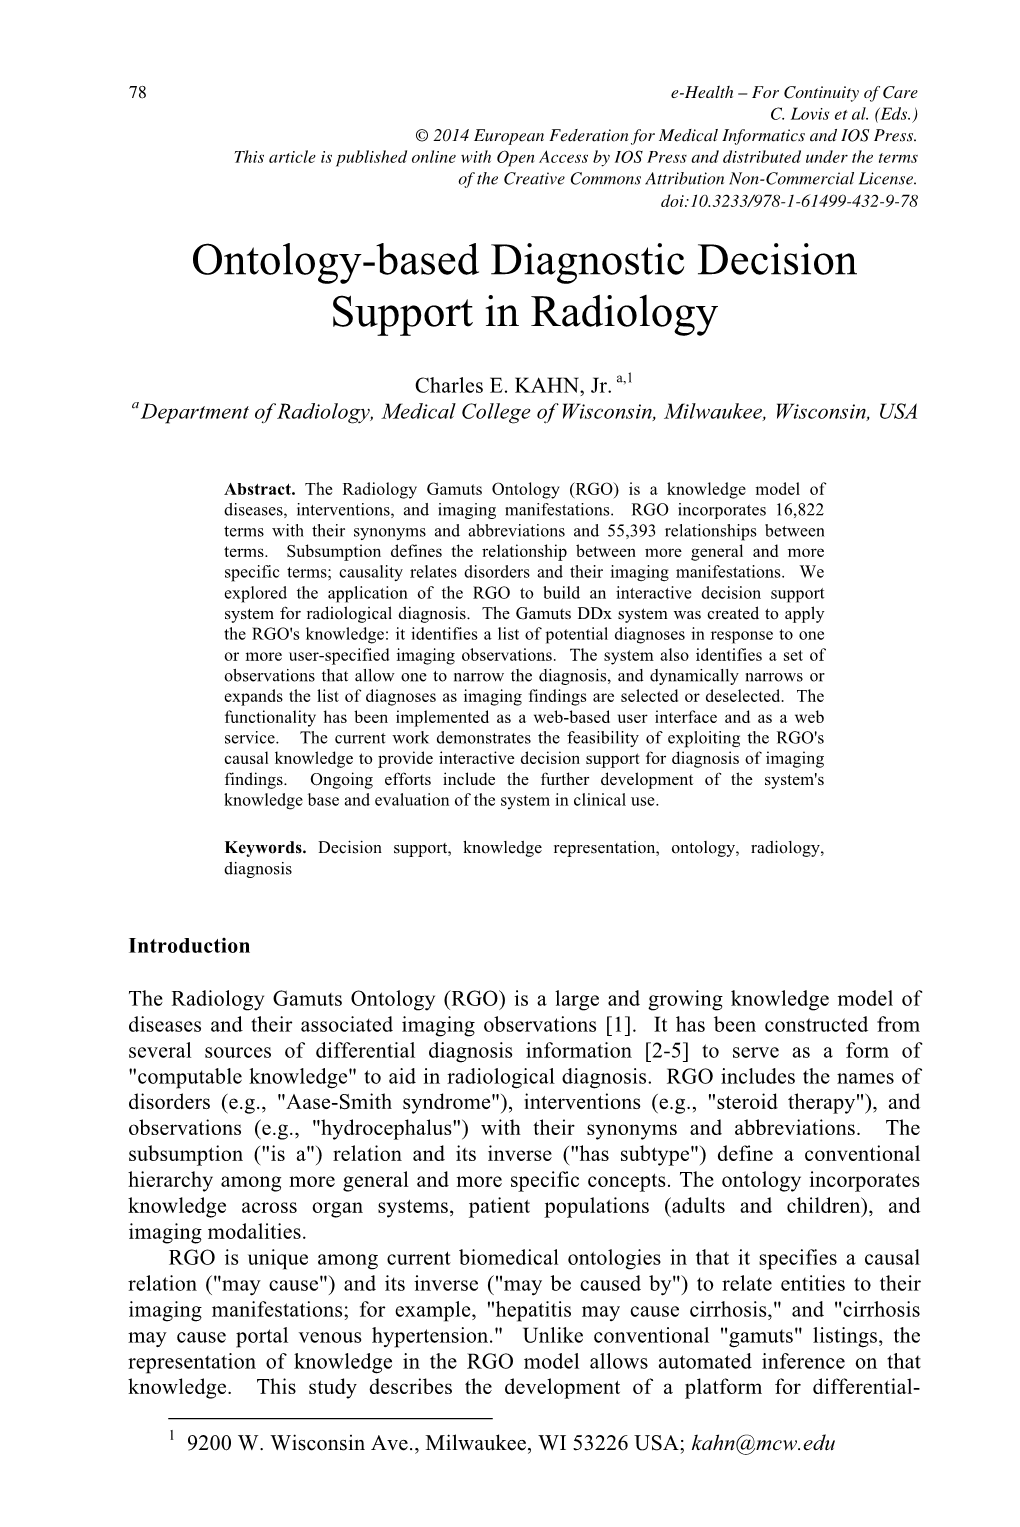 Ontology-Based Diagnostic Decision Support in Radiology